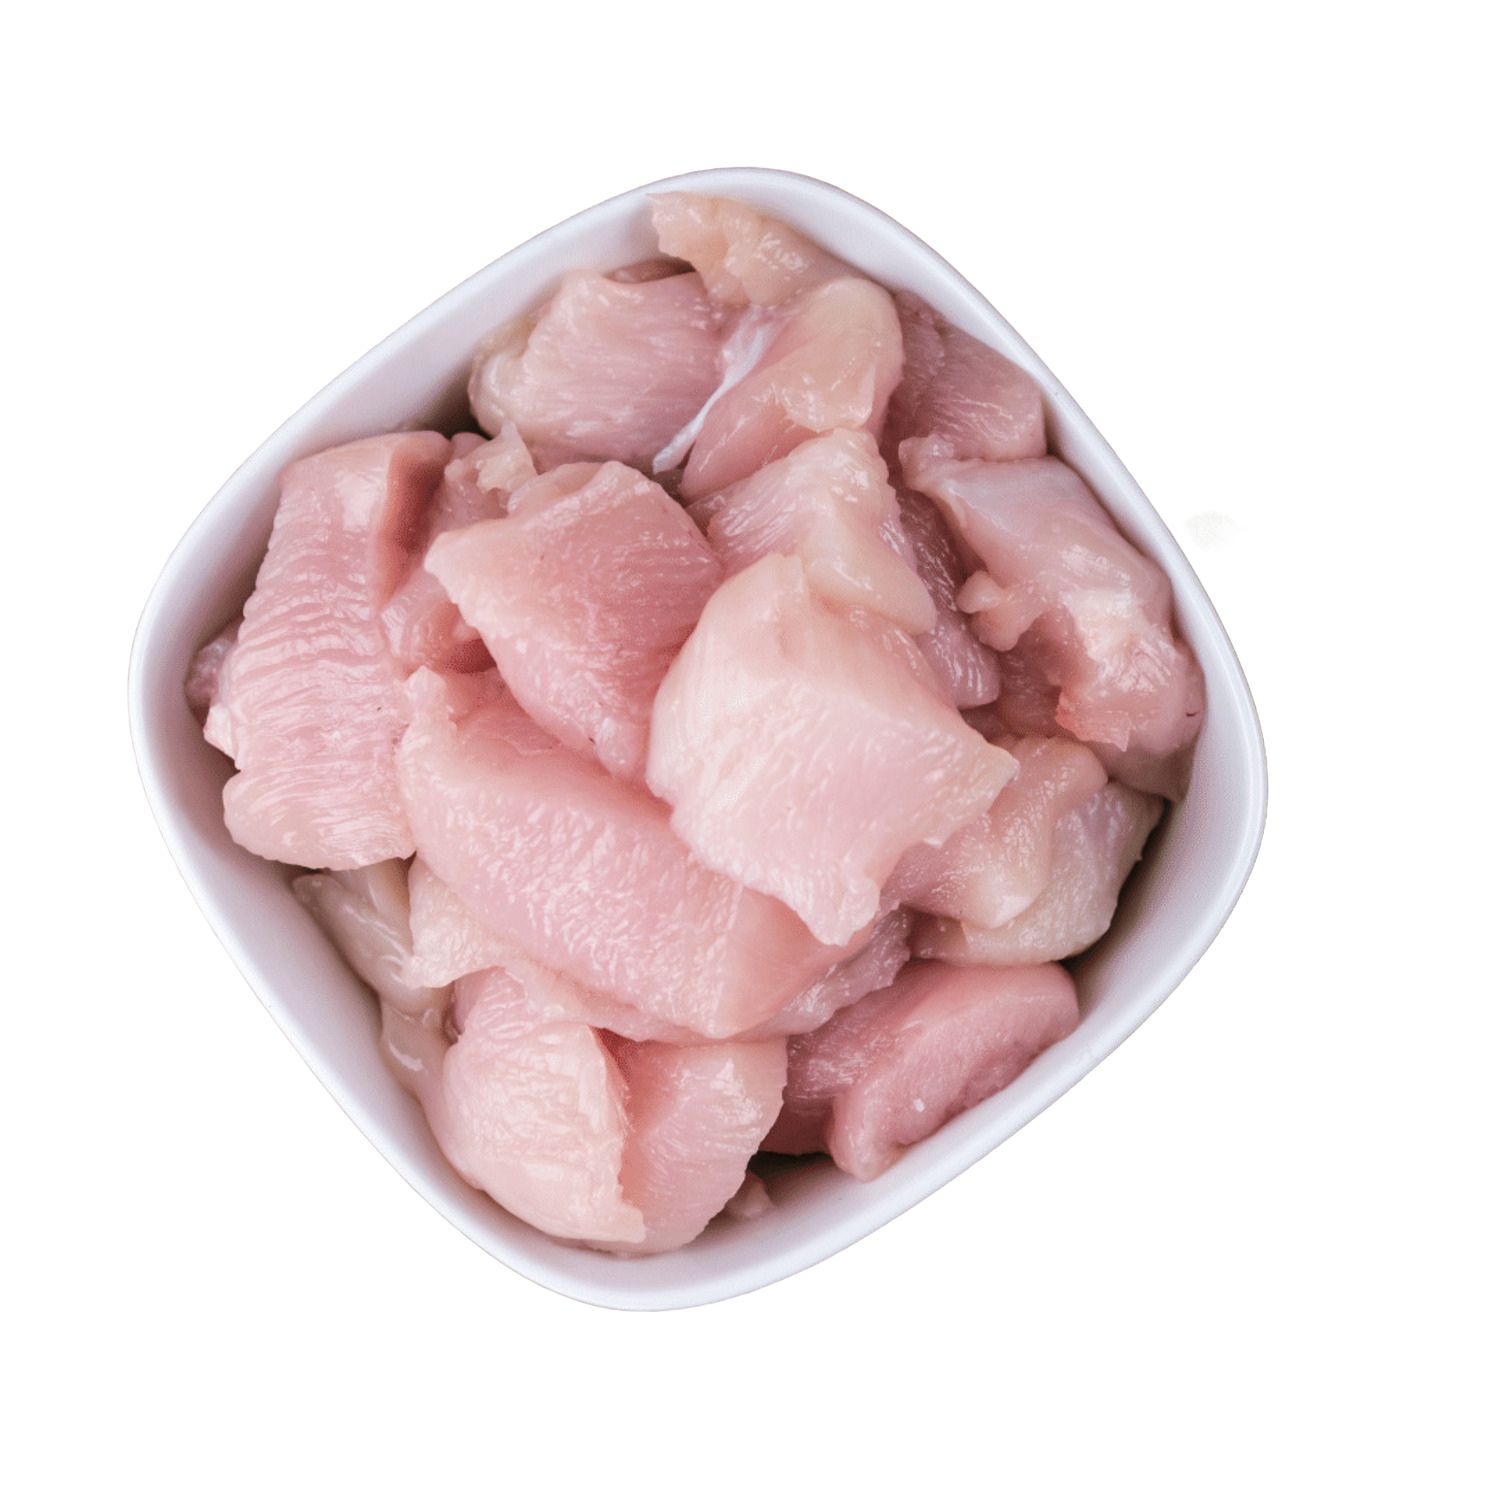 Chicken Curry Cut - Small Pieces,Large Pack